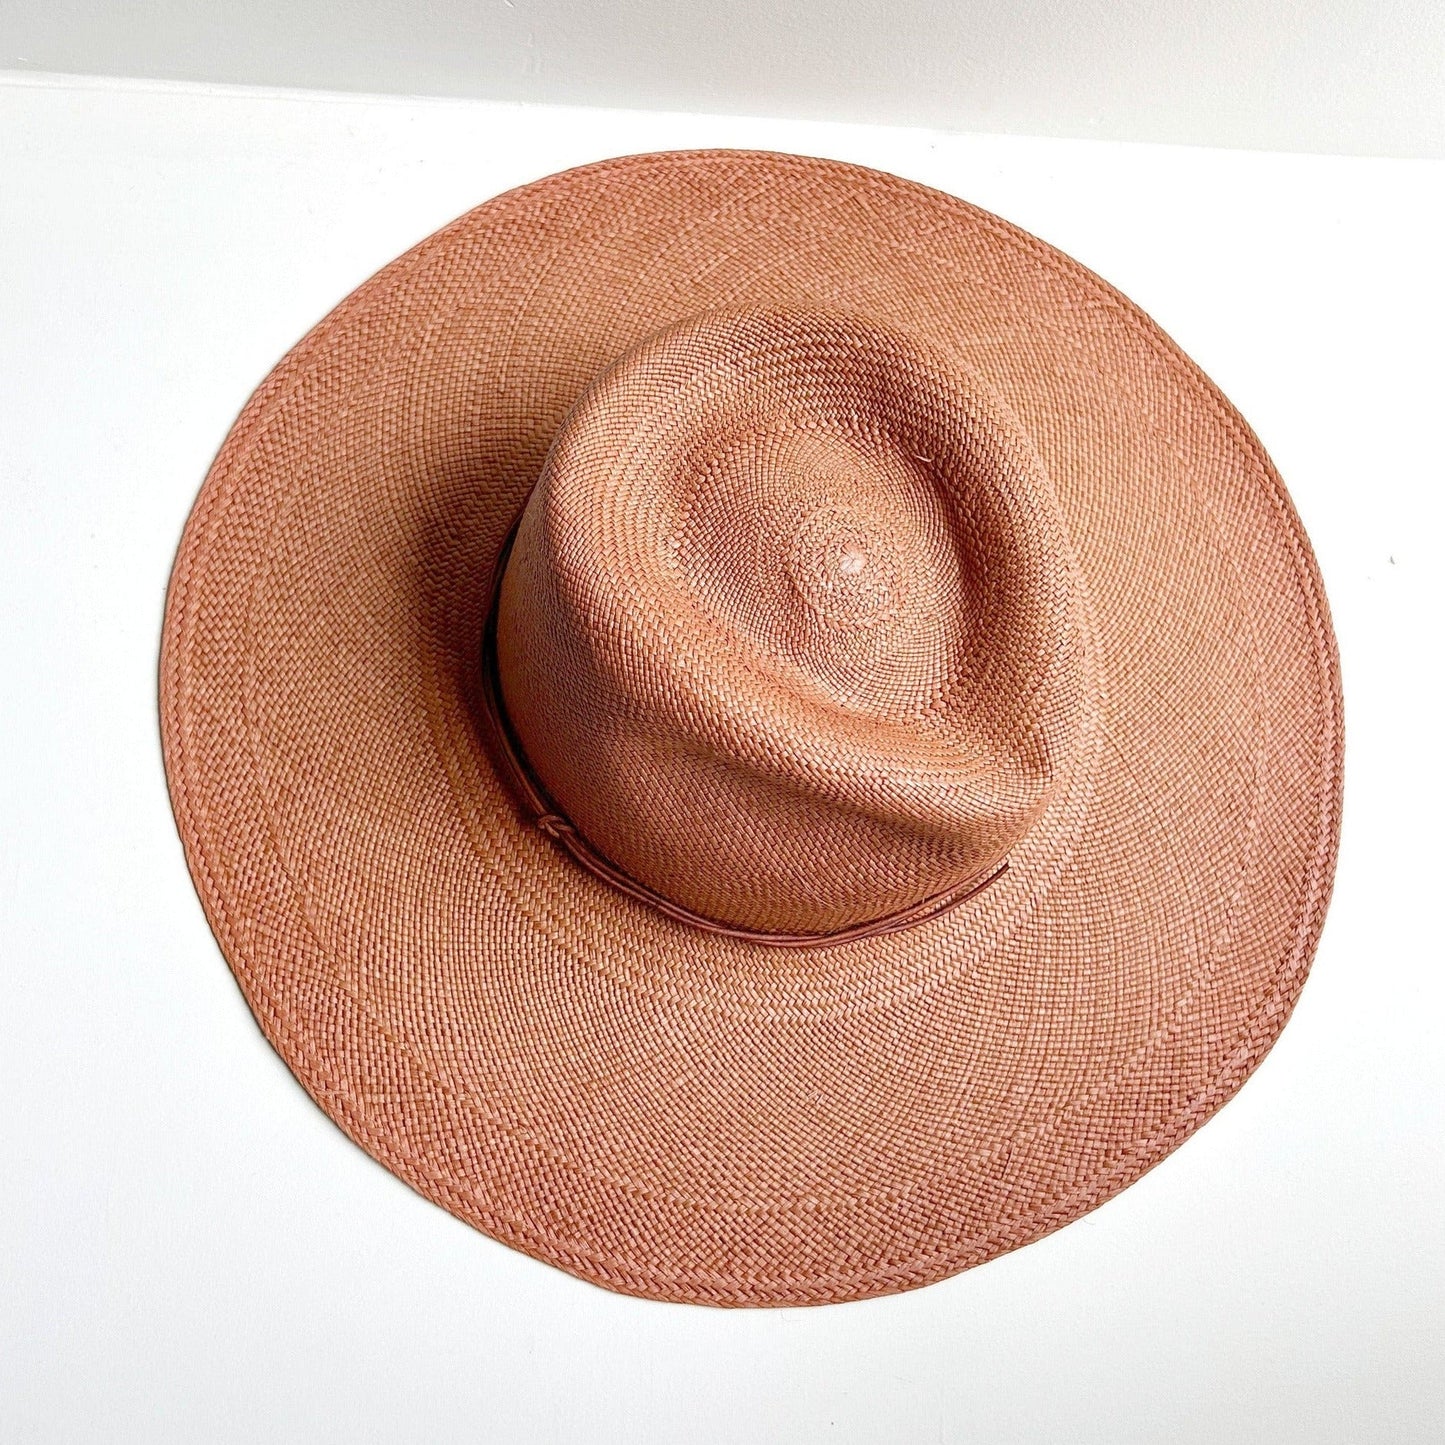 Wakefield Sun Hat in Panama Straw Accessories Brookes Boswell S  